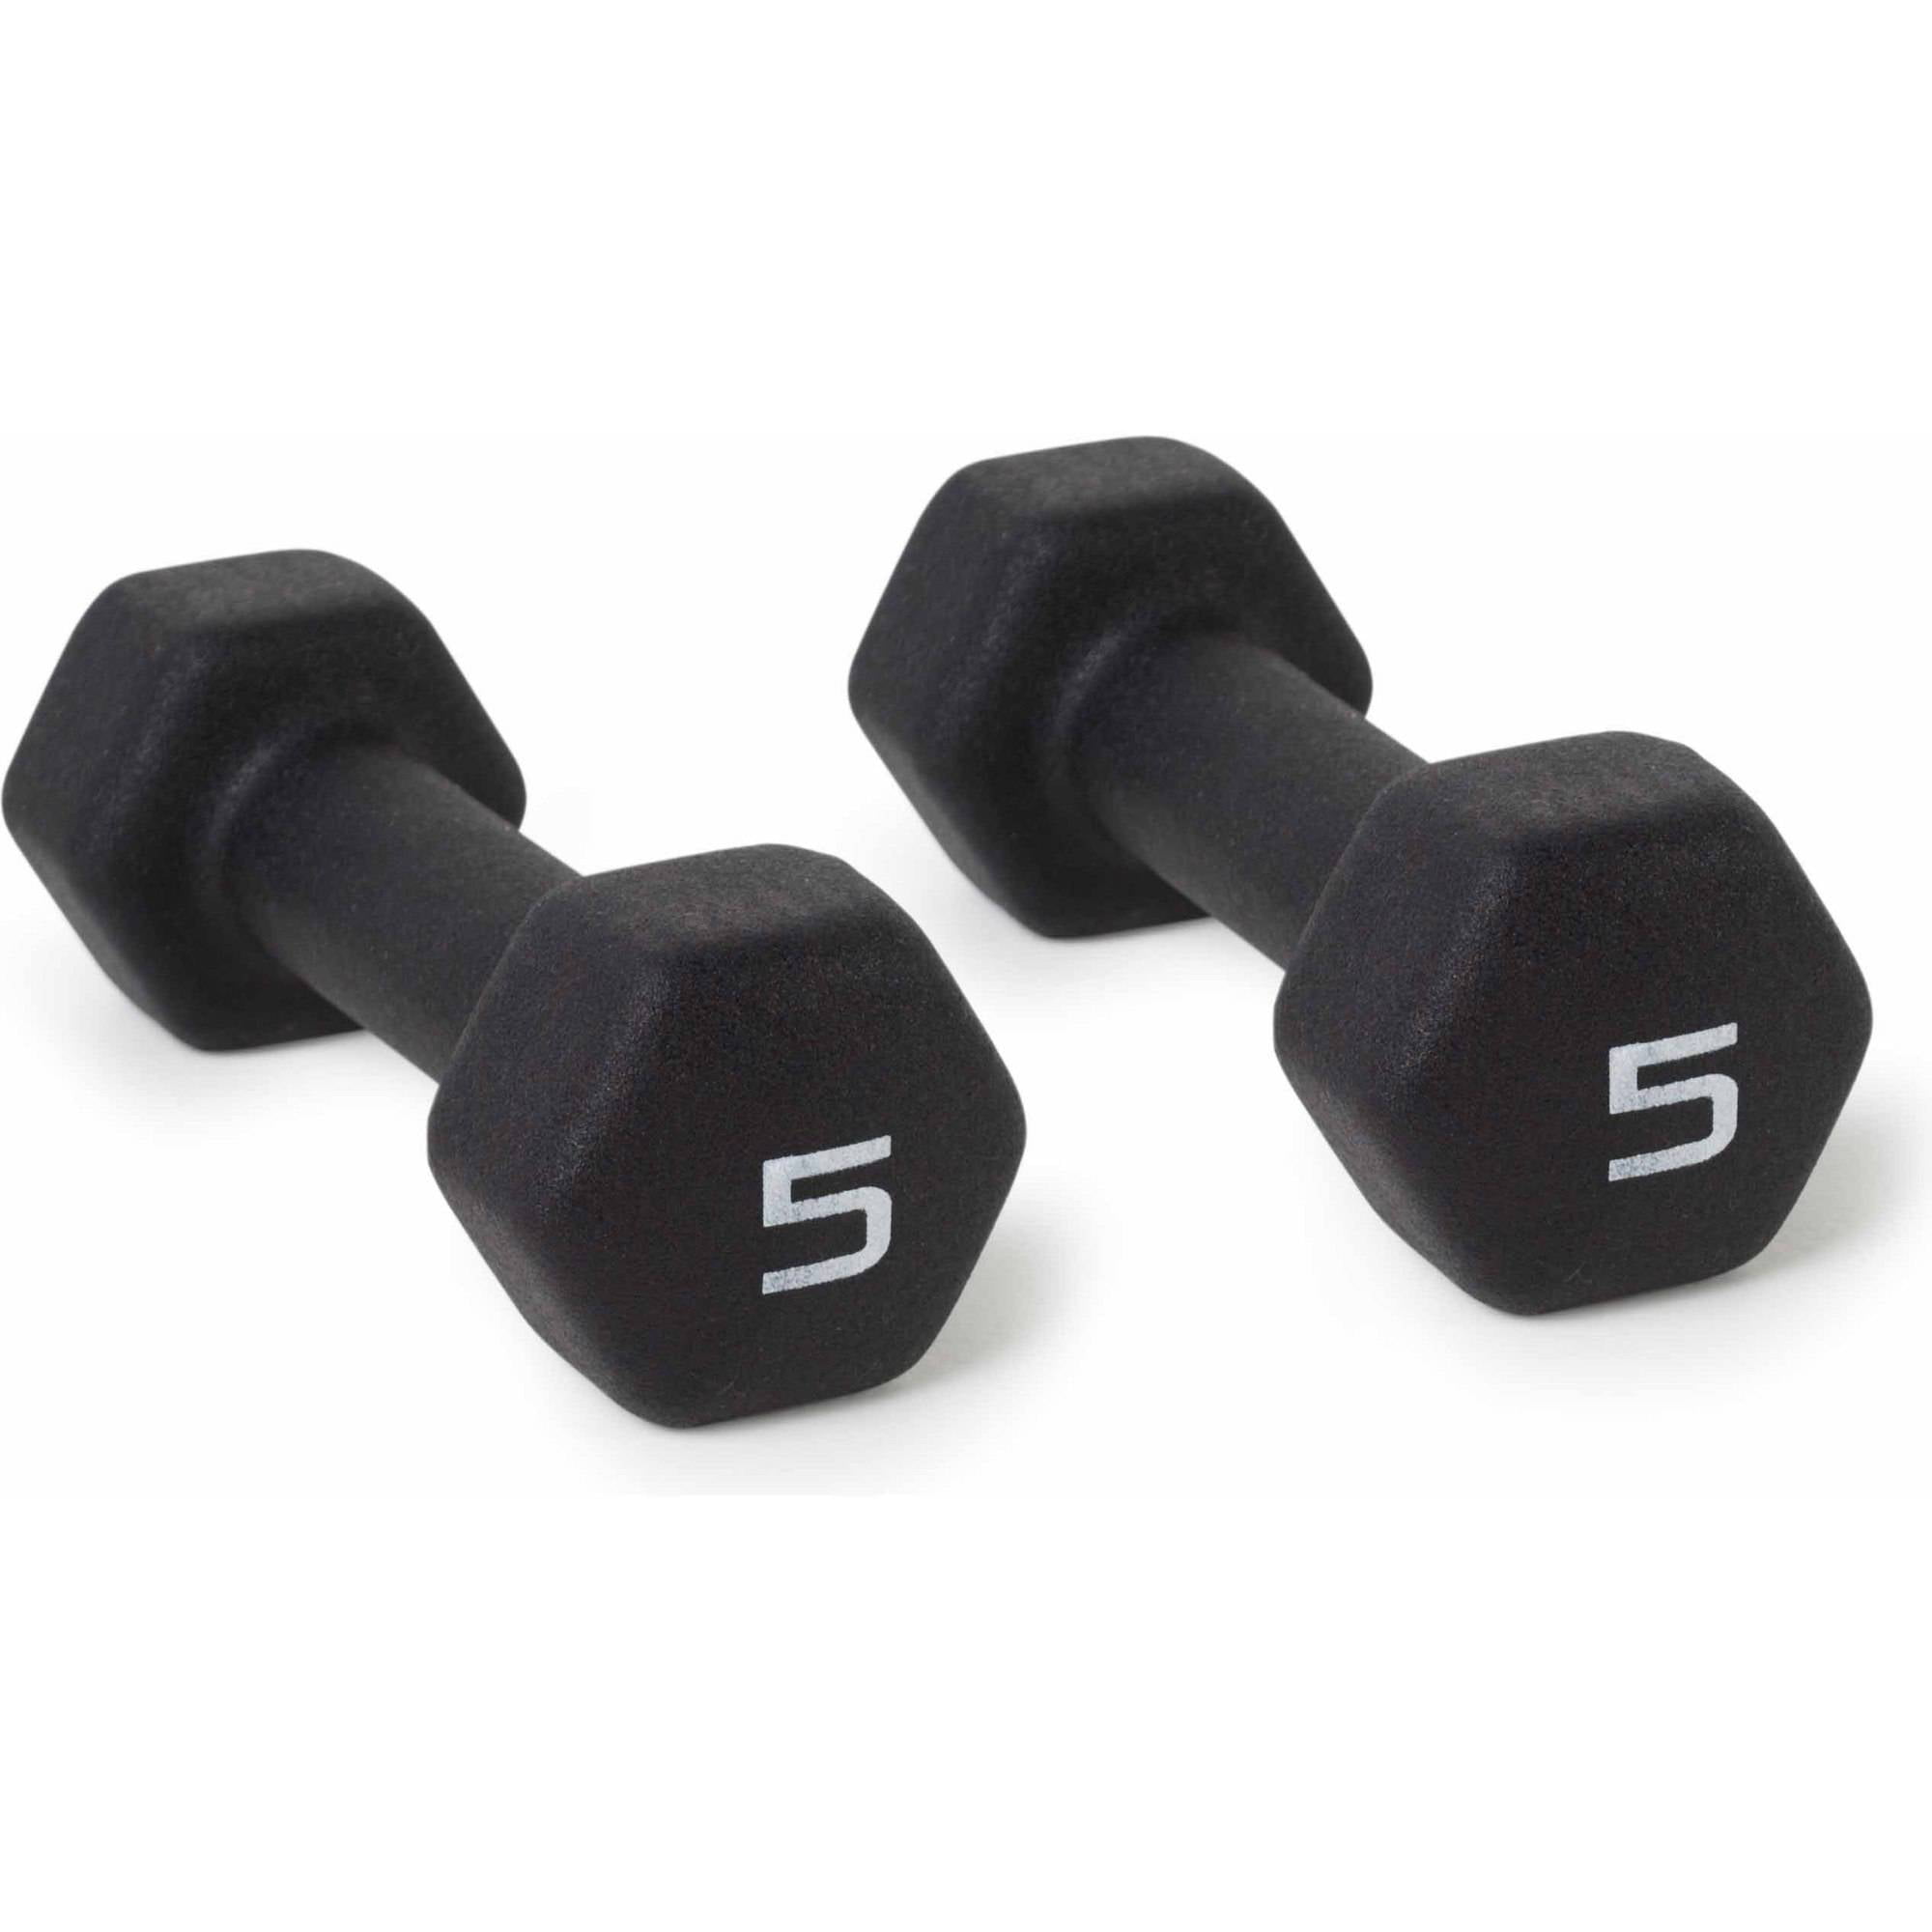 Single CAP Barbell Neoprene Coated Dumbbell Weights 5 Pound Magenta 